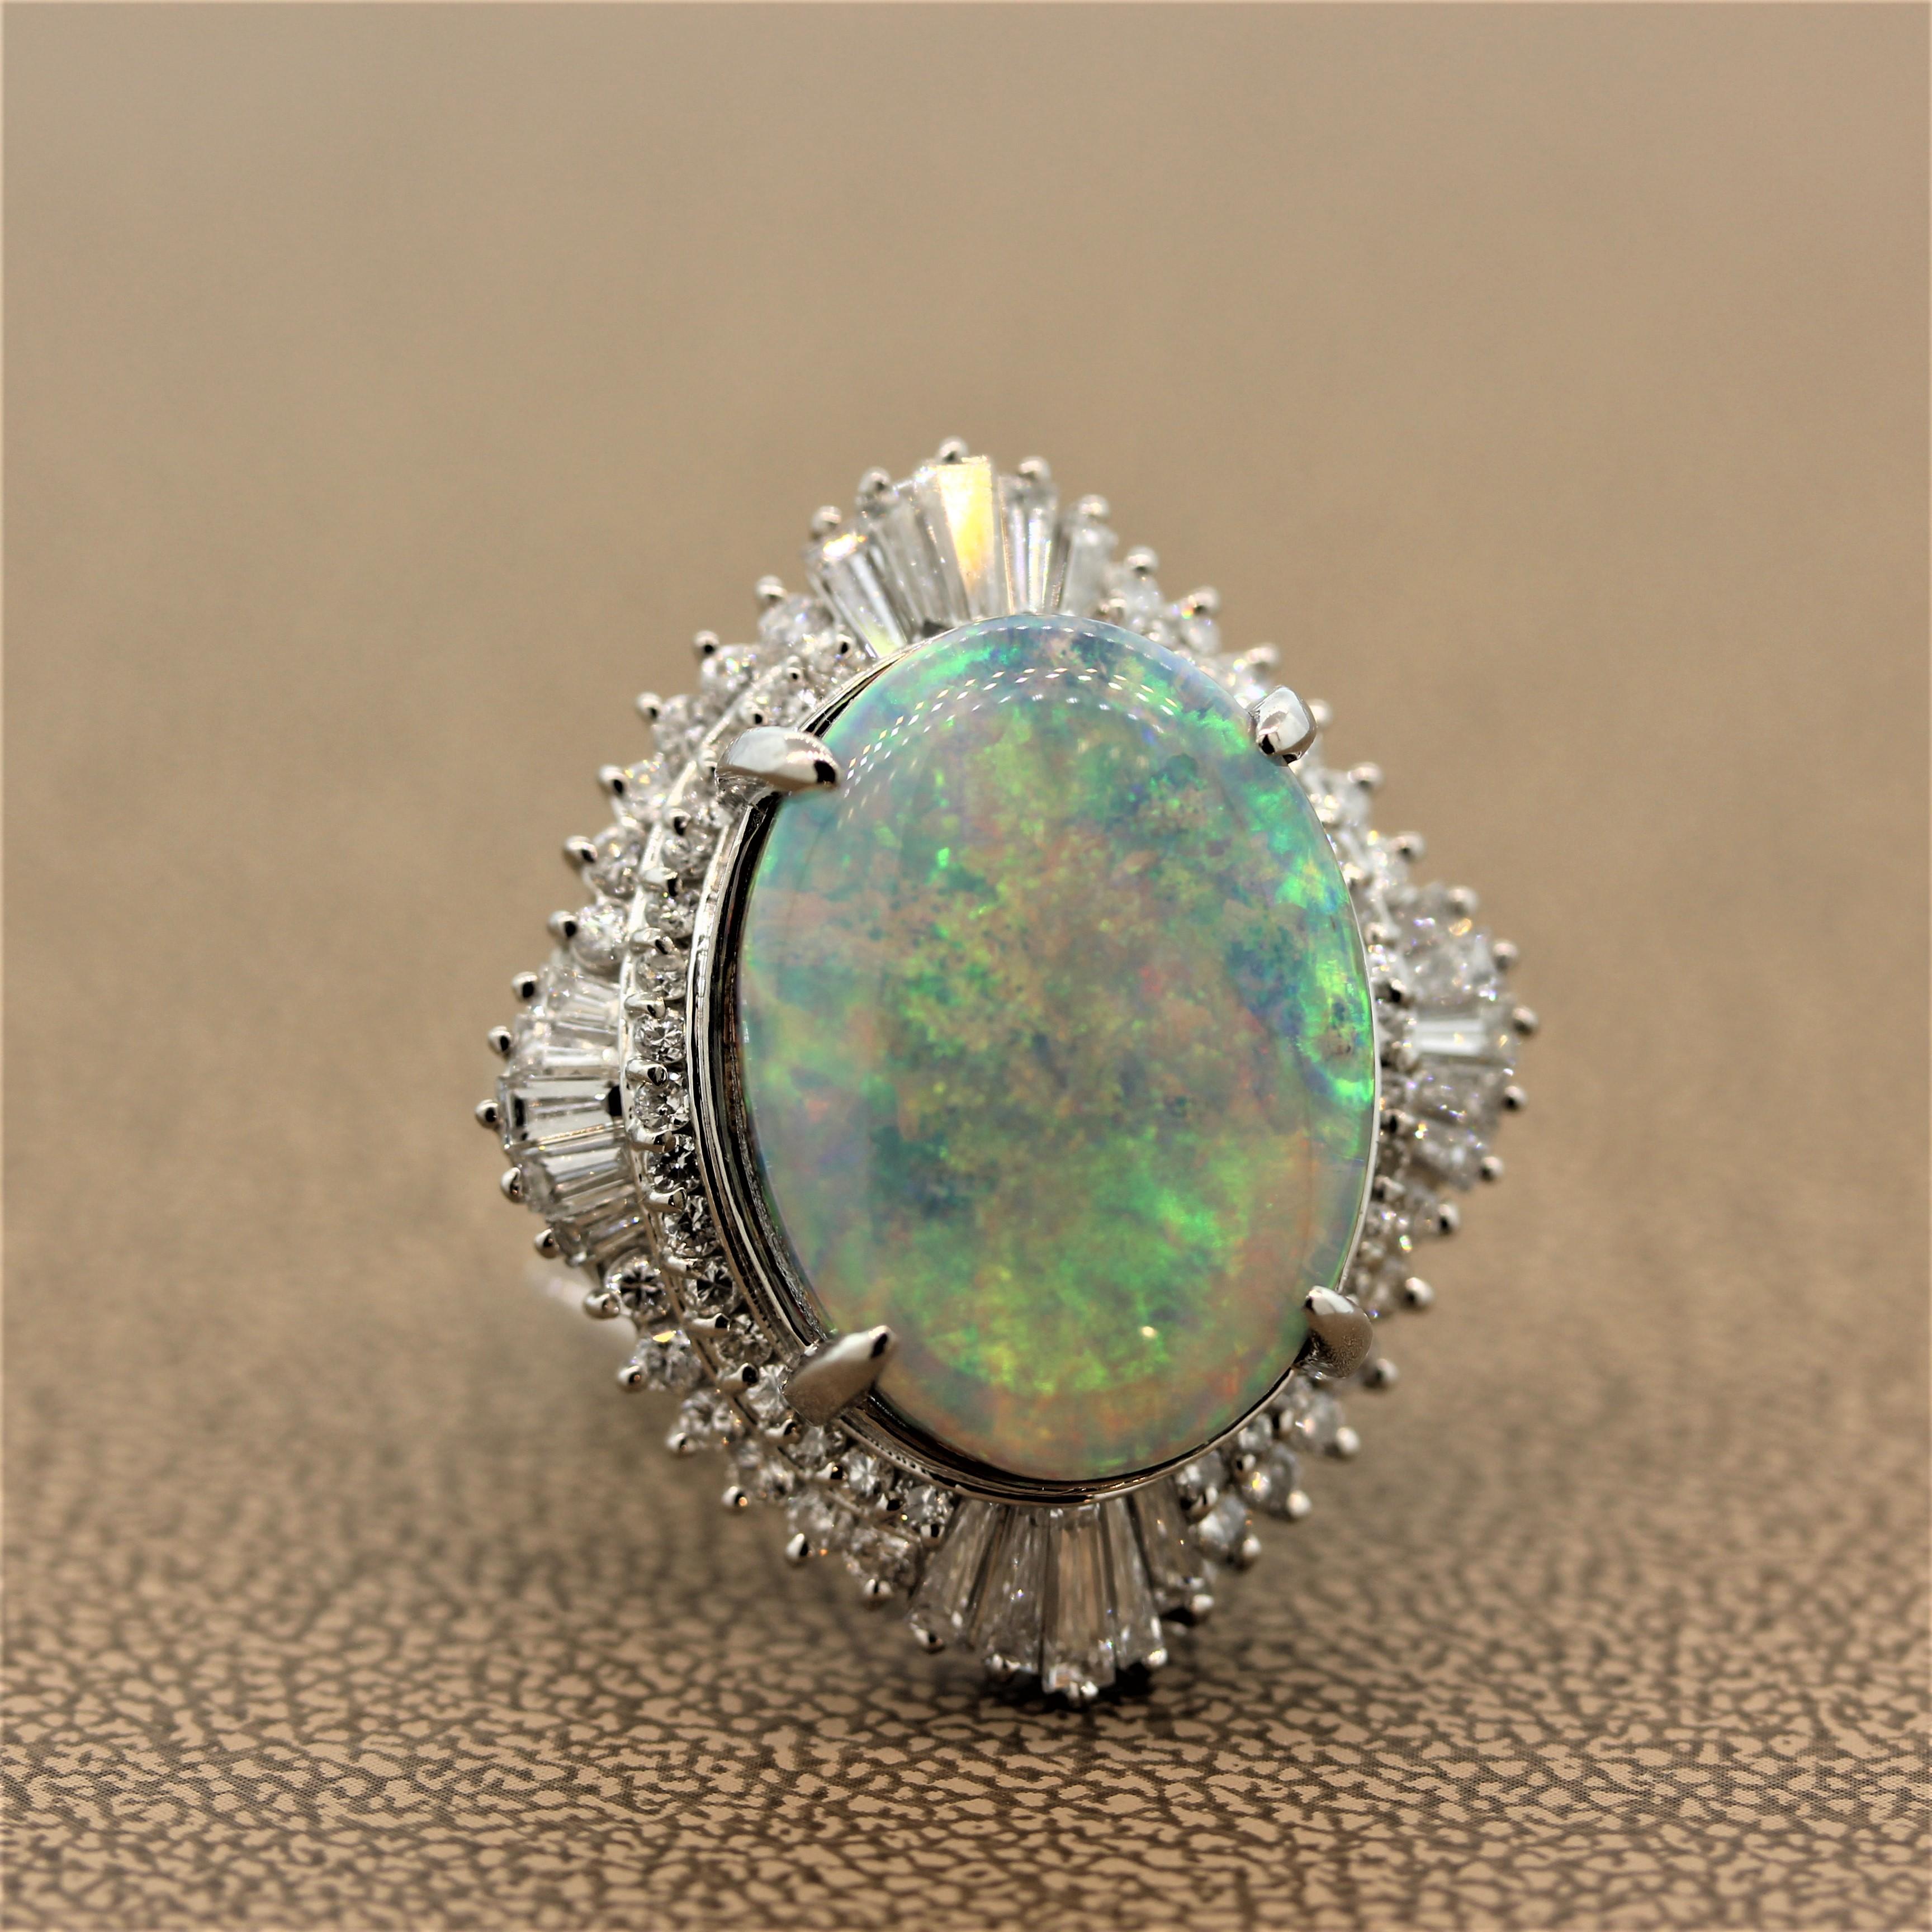 A vibrant estate cocktail ring featuring a 15.38 carat opal with exceptional play of color. The oval cabochon opal is haloed by 2.01 carats of colorless round cut diamonds with tapered baguette cut diamonds on its four sides. This platinum ring